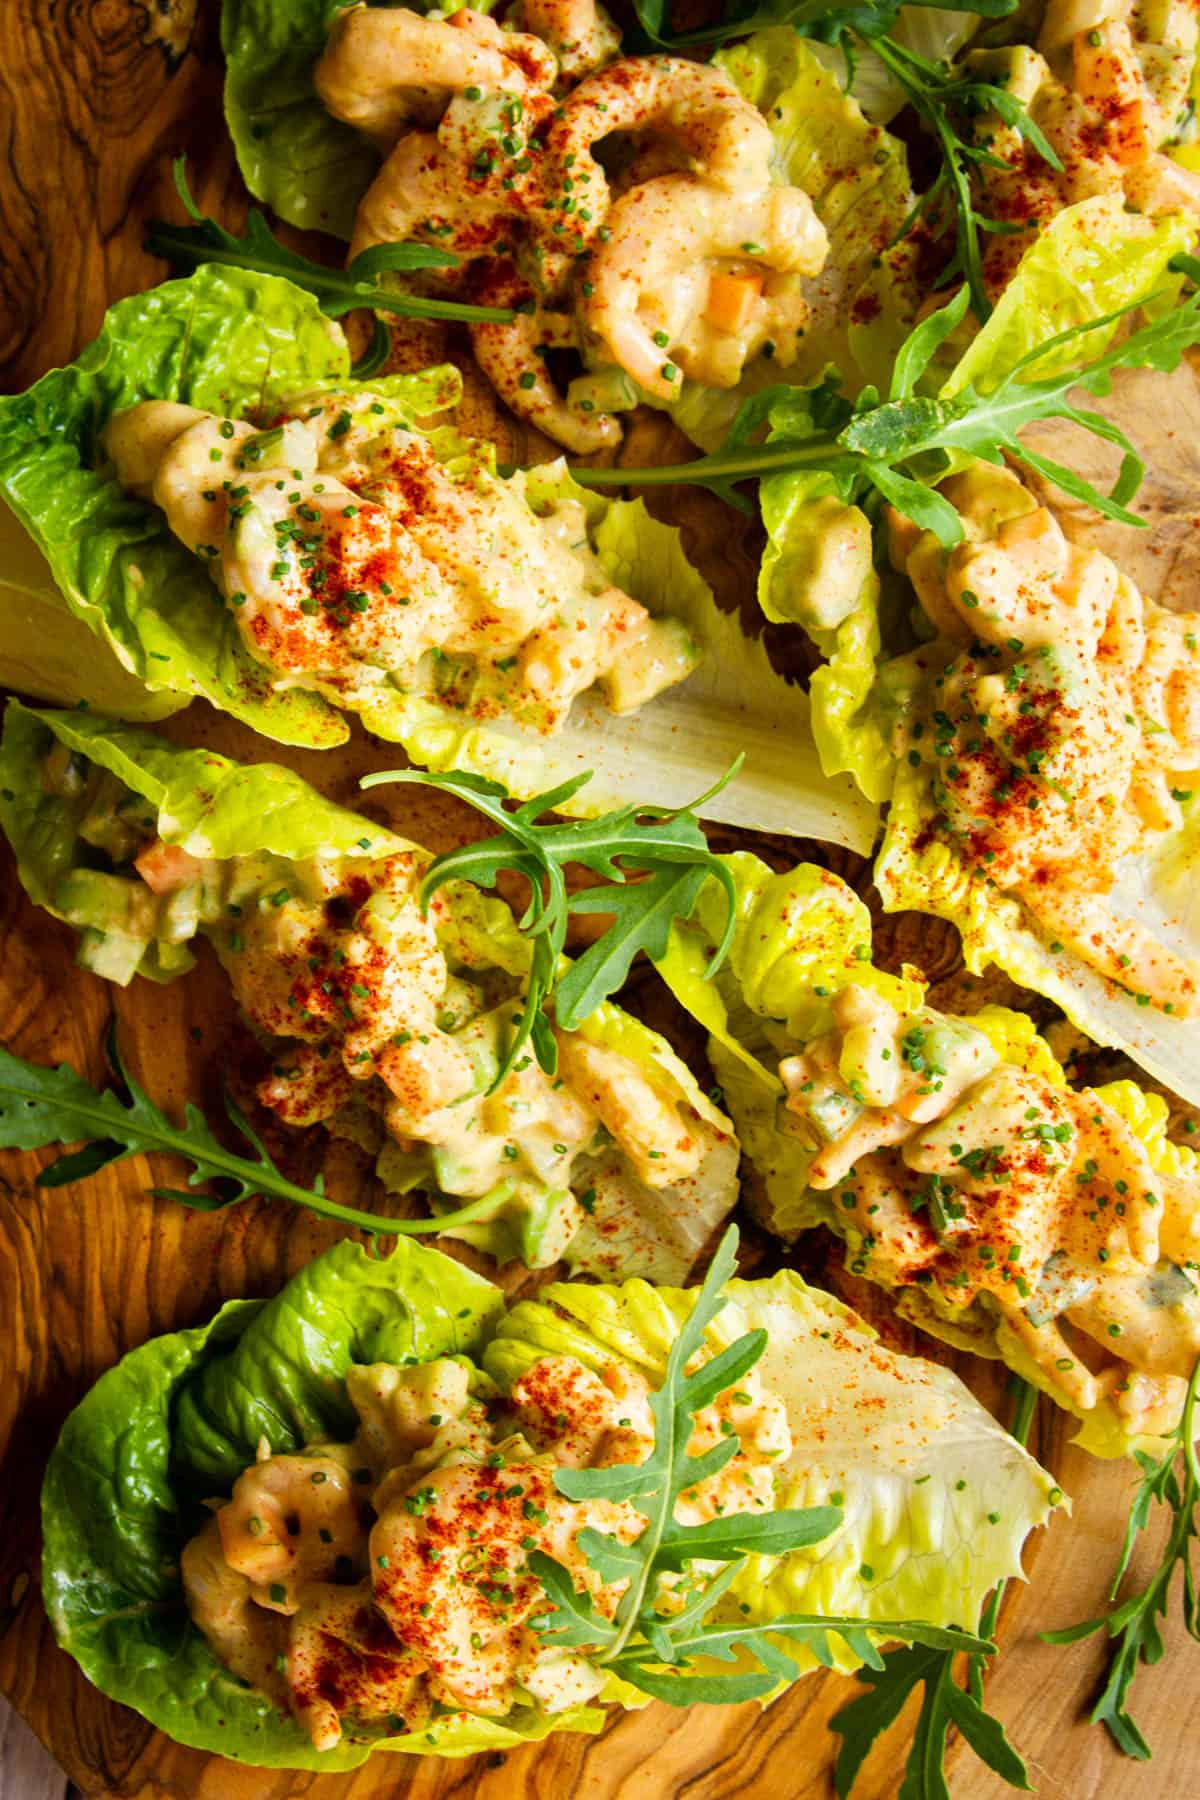 Another close up shot of the baby shrimp salad lettuce wraps on a board.